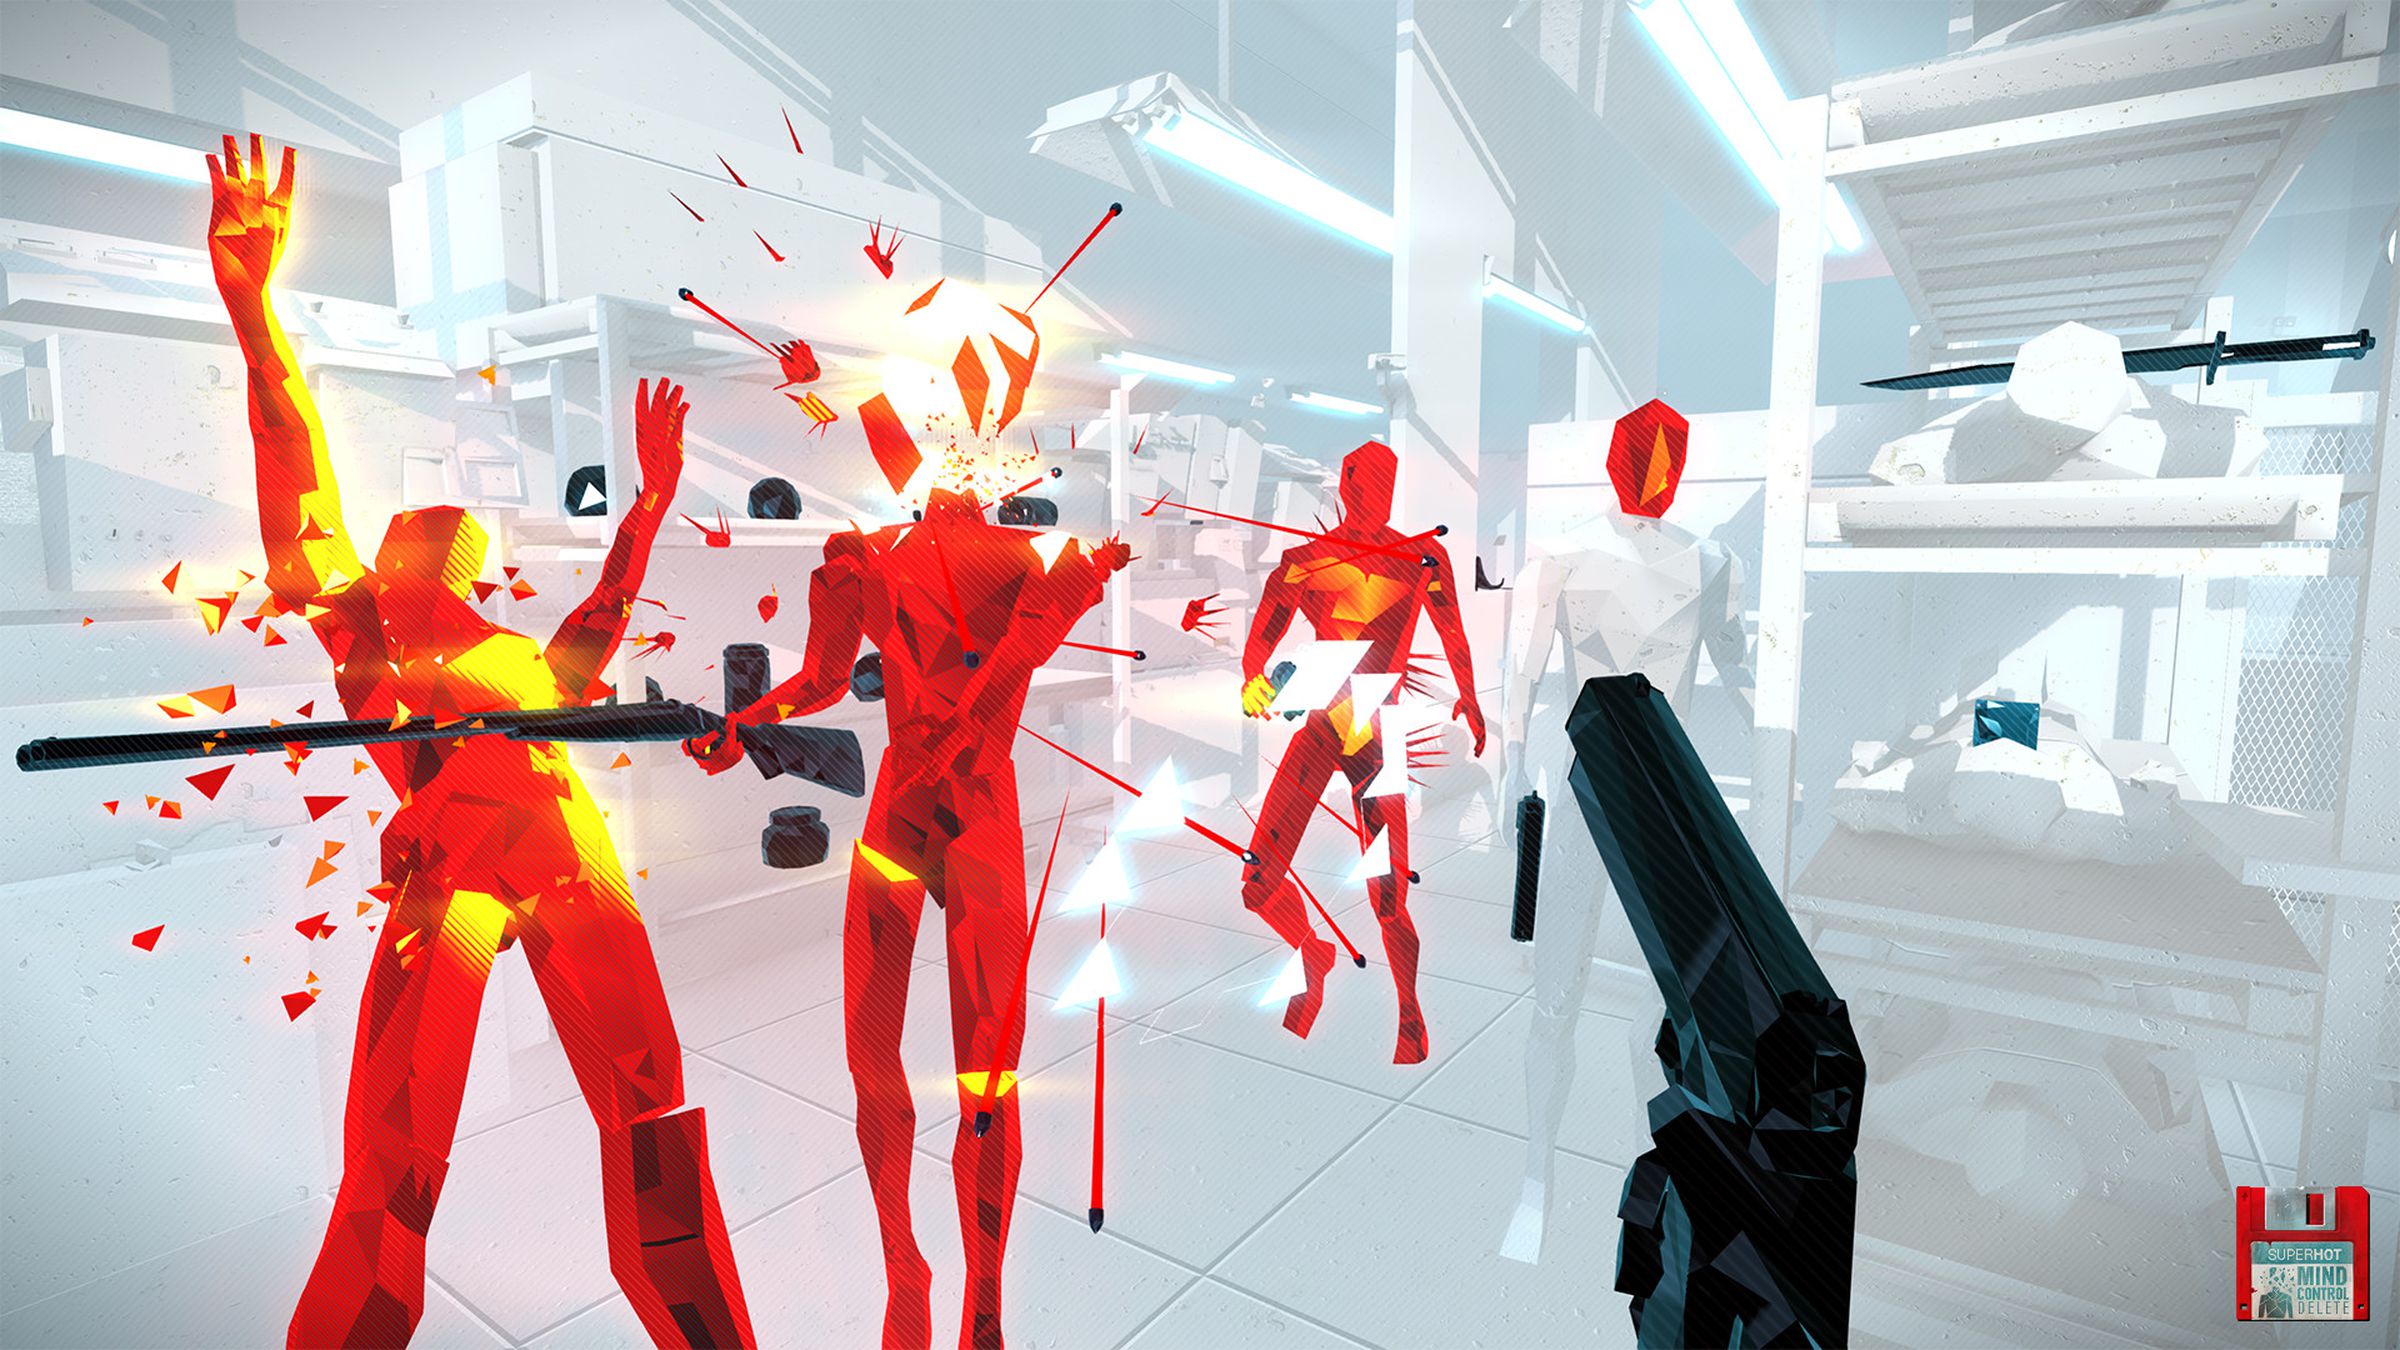 Red figures being shot and exploding against a white background.